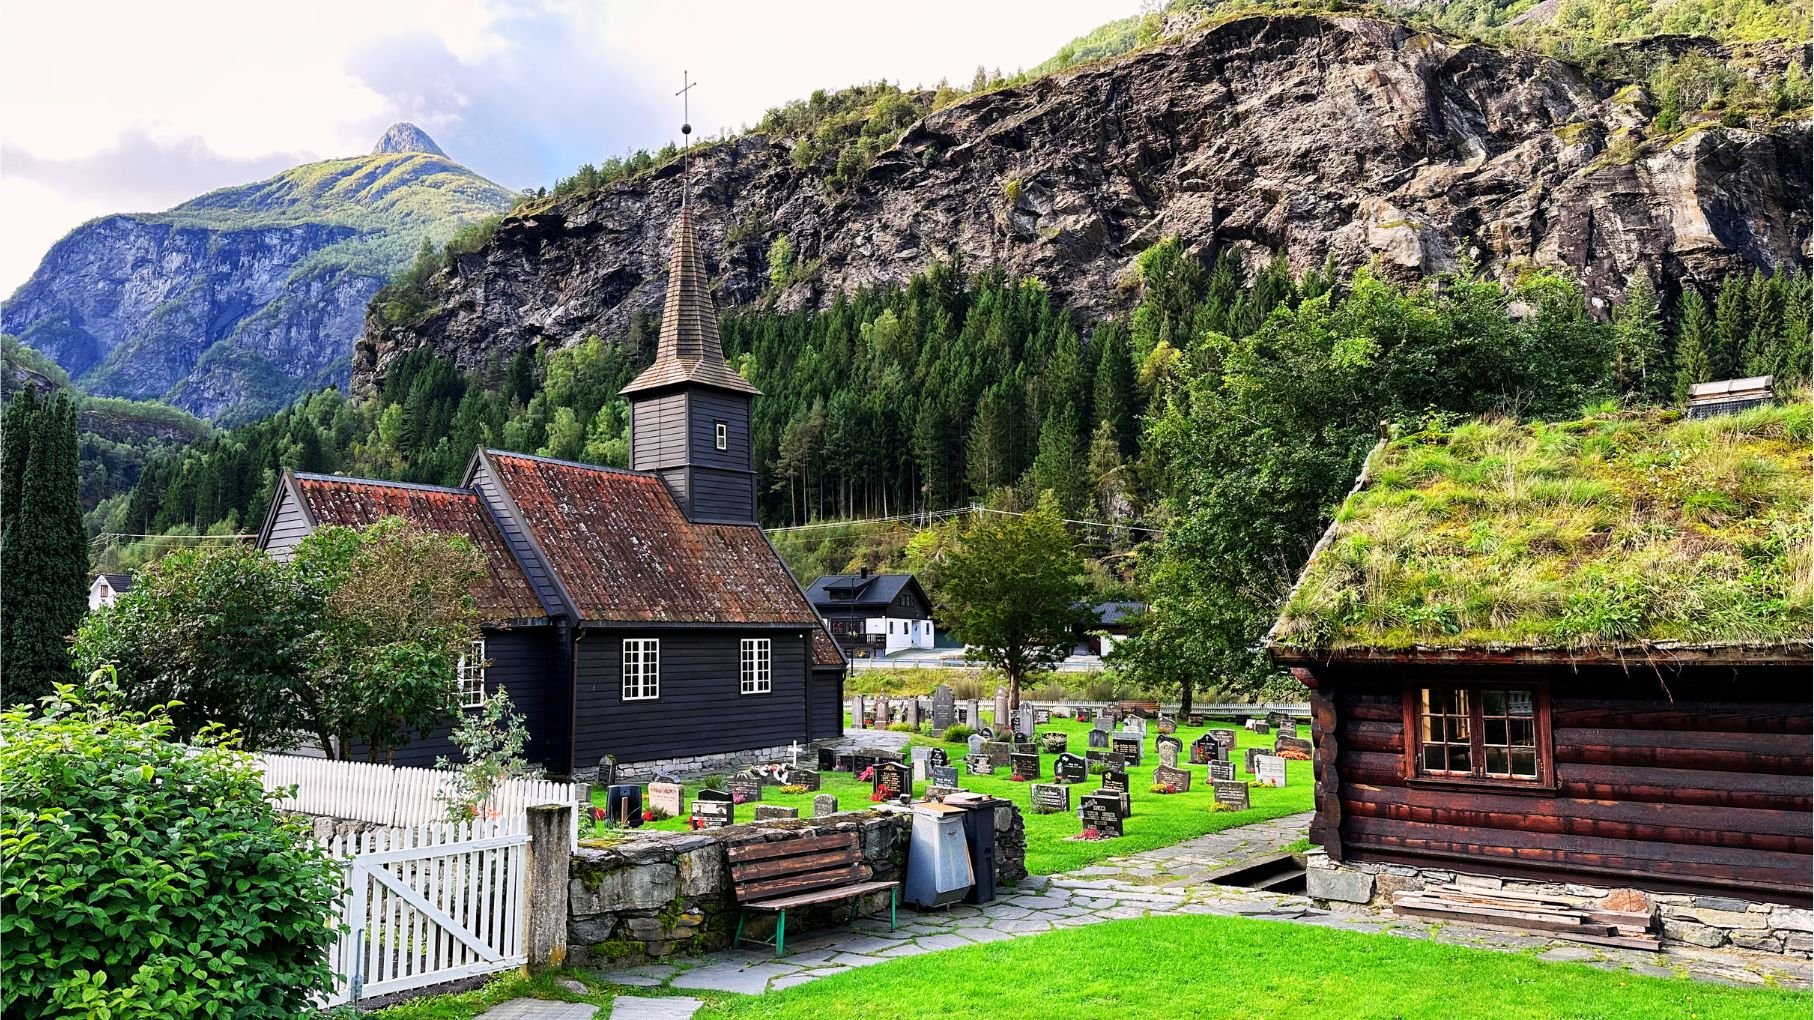 The beautiful setting of Flåm Church in the Fjord Norway region.